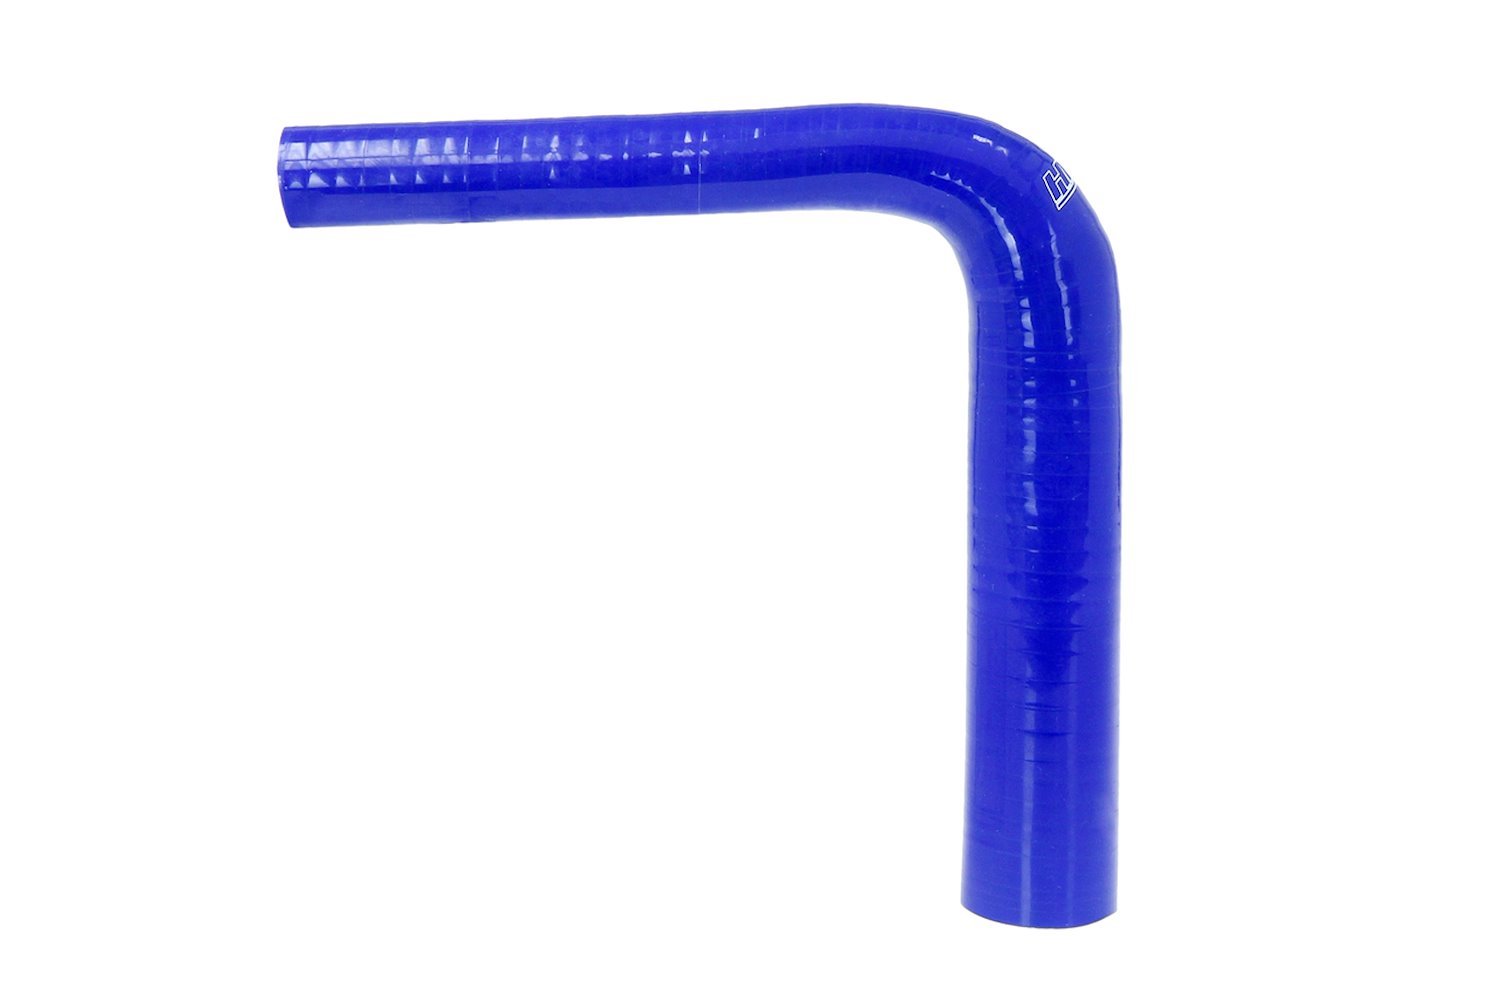 HTSER90-175-200-BLUE Silicone 90-Degree Elbow Hose, High-Temp 4-Ply Reinforced, 1-3/4 in. - 2 in. ID, Blue